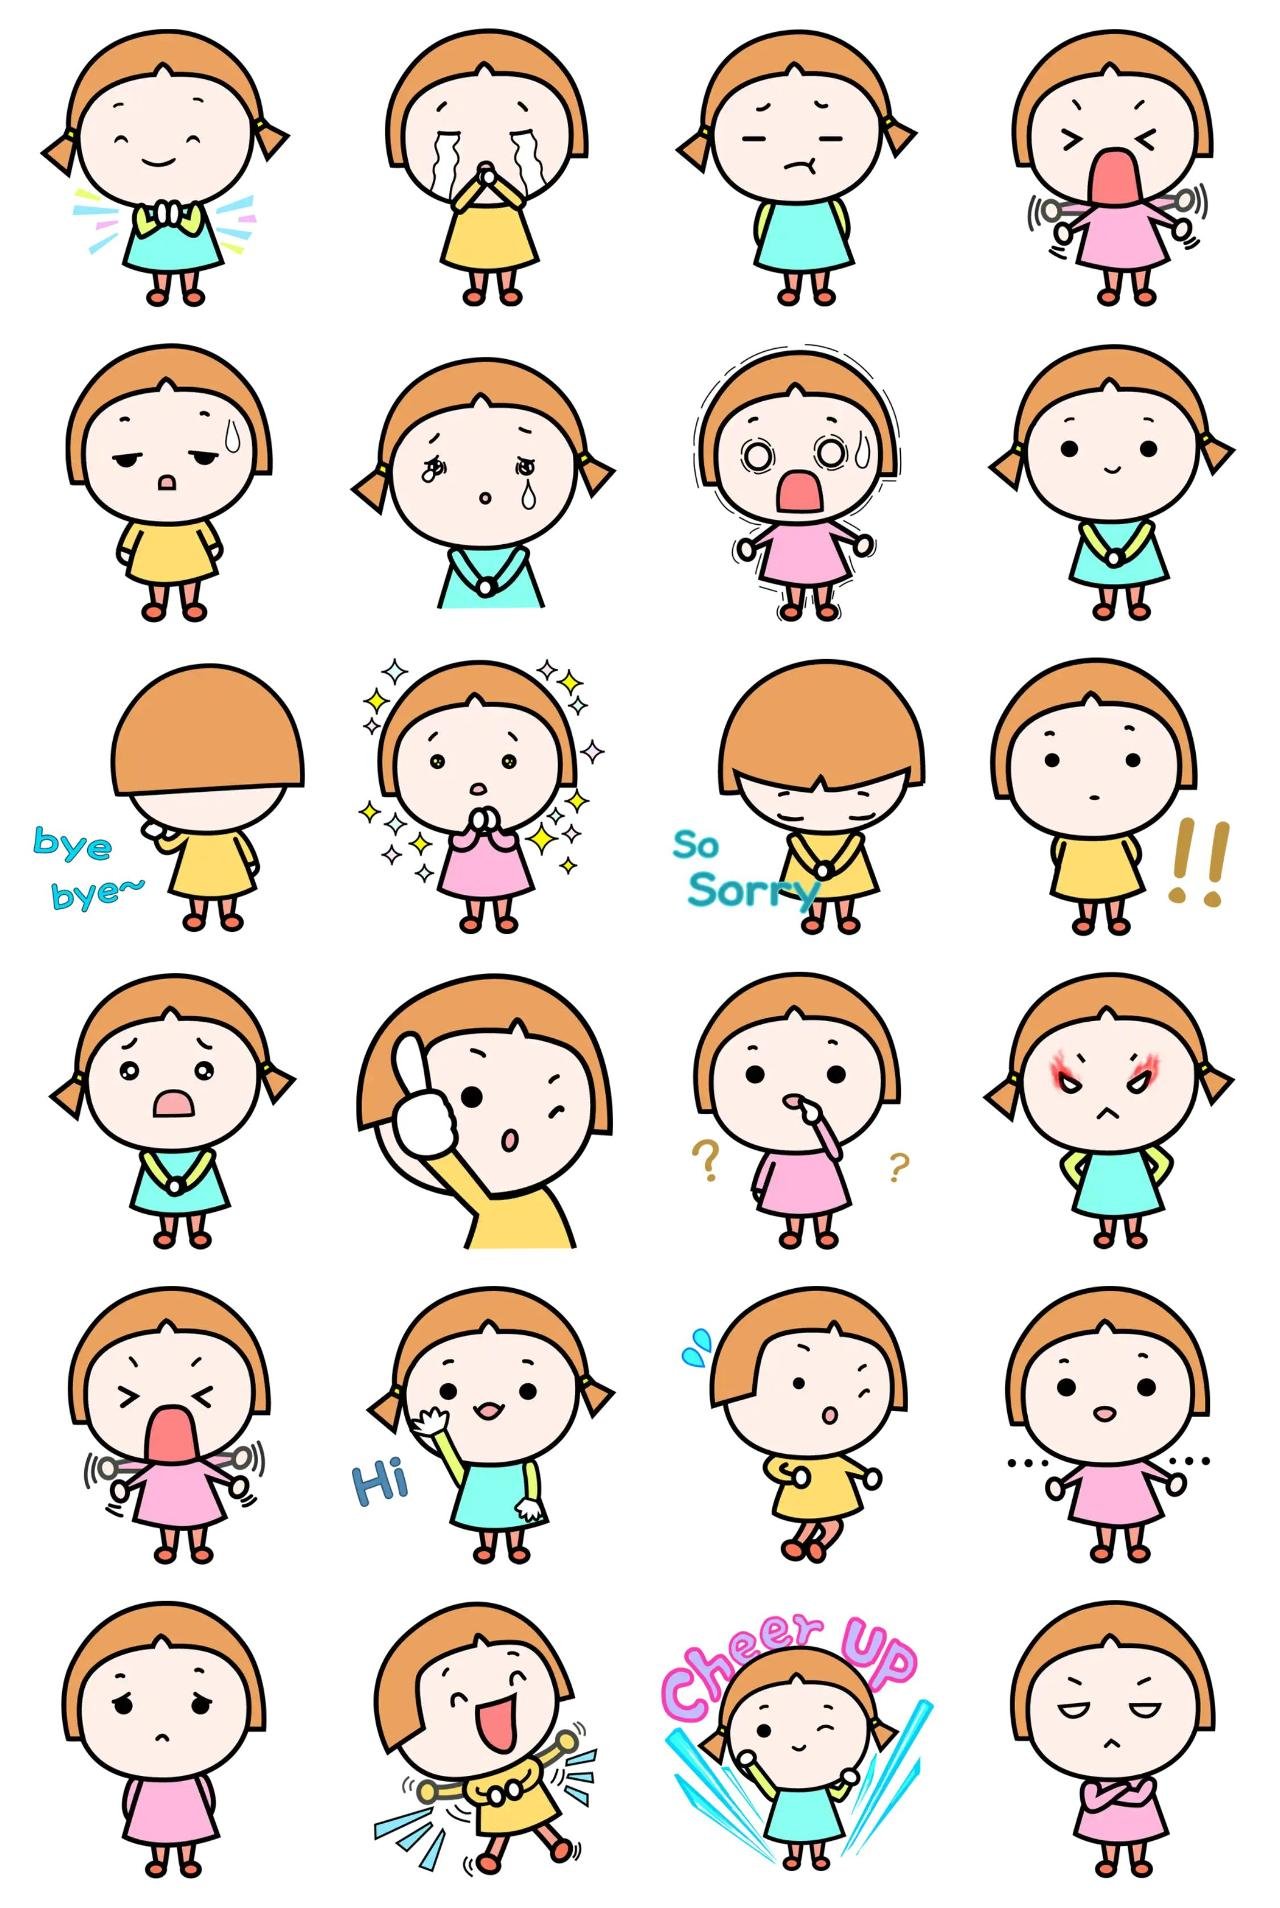 The little lady Youngsoon2 People sticker pack for Whatsapp, Telegram, Signal, and others chatting and message apps